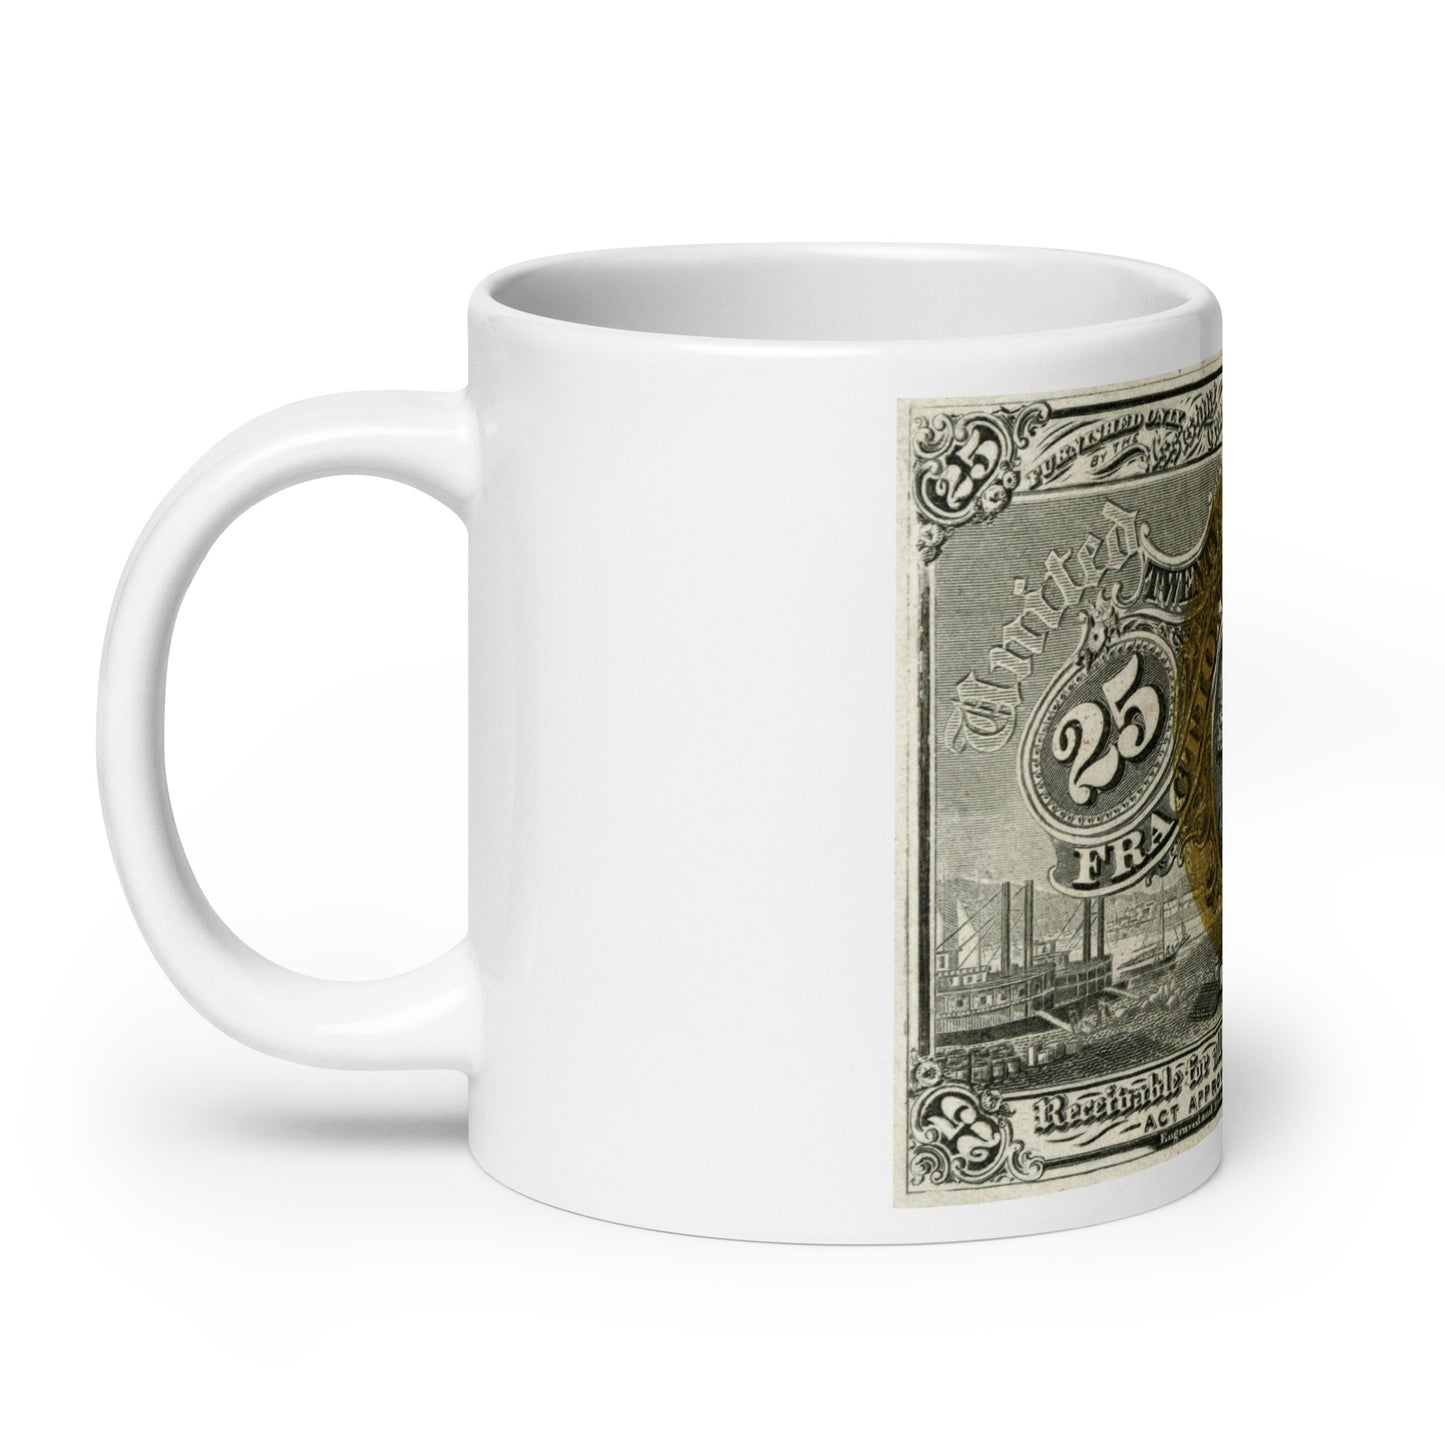 25 Cents 2ND Issue Fractional Currency Edition - Classic Currency Collector's Mug